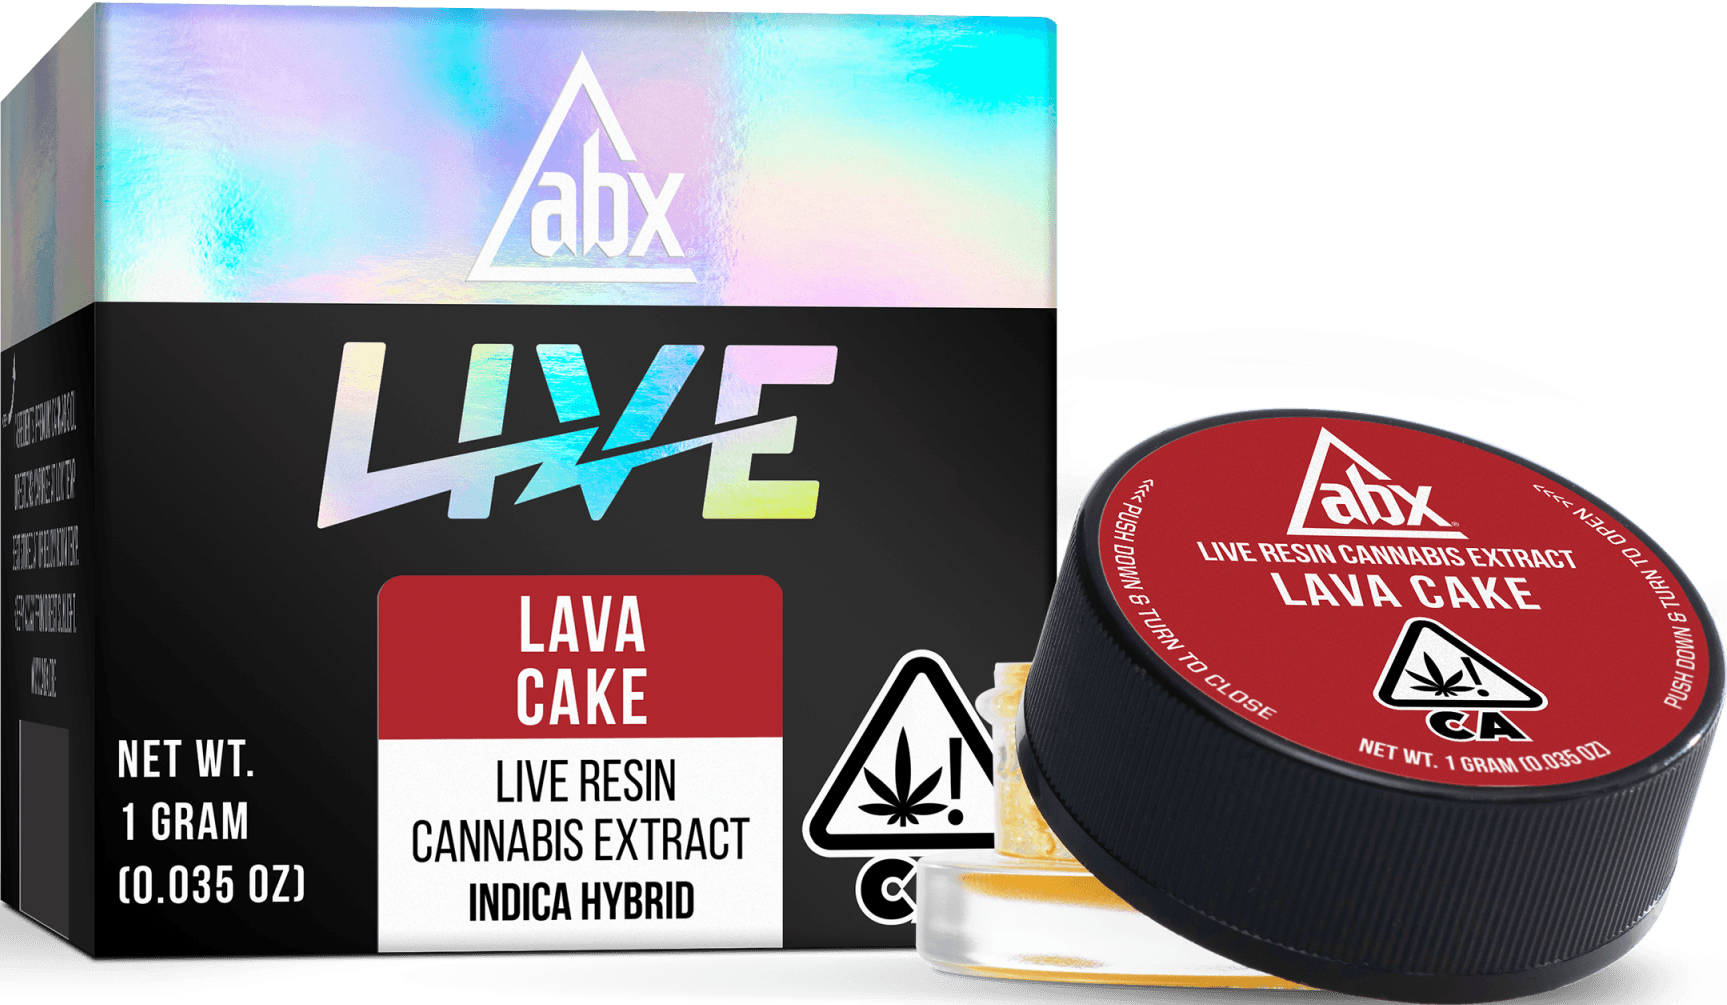 Lava Cake Live Resin Concentrate